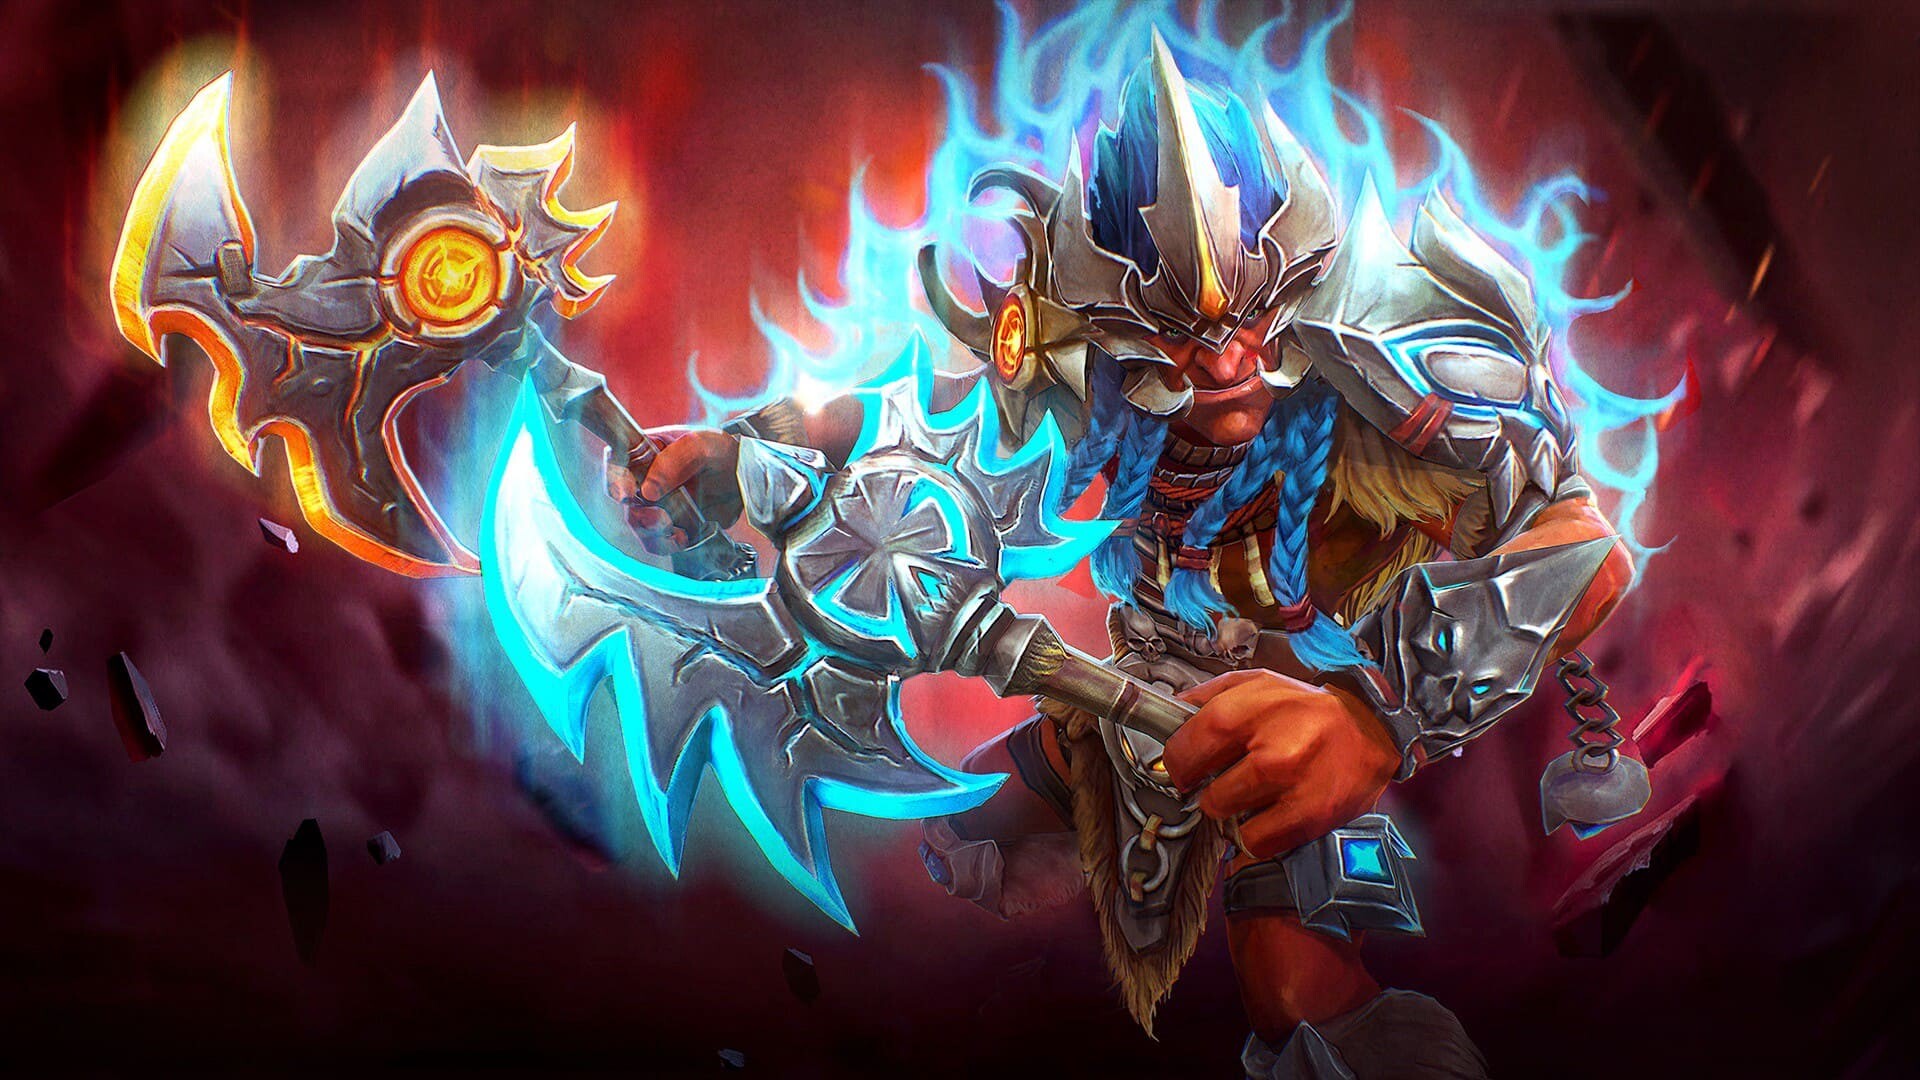 Dota 2: Troll Warlord, Swaps between ranged and melee attacks at will. 1920x1080 Full HD Wallpaper.